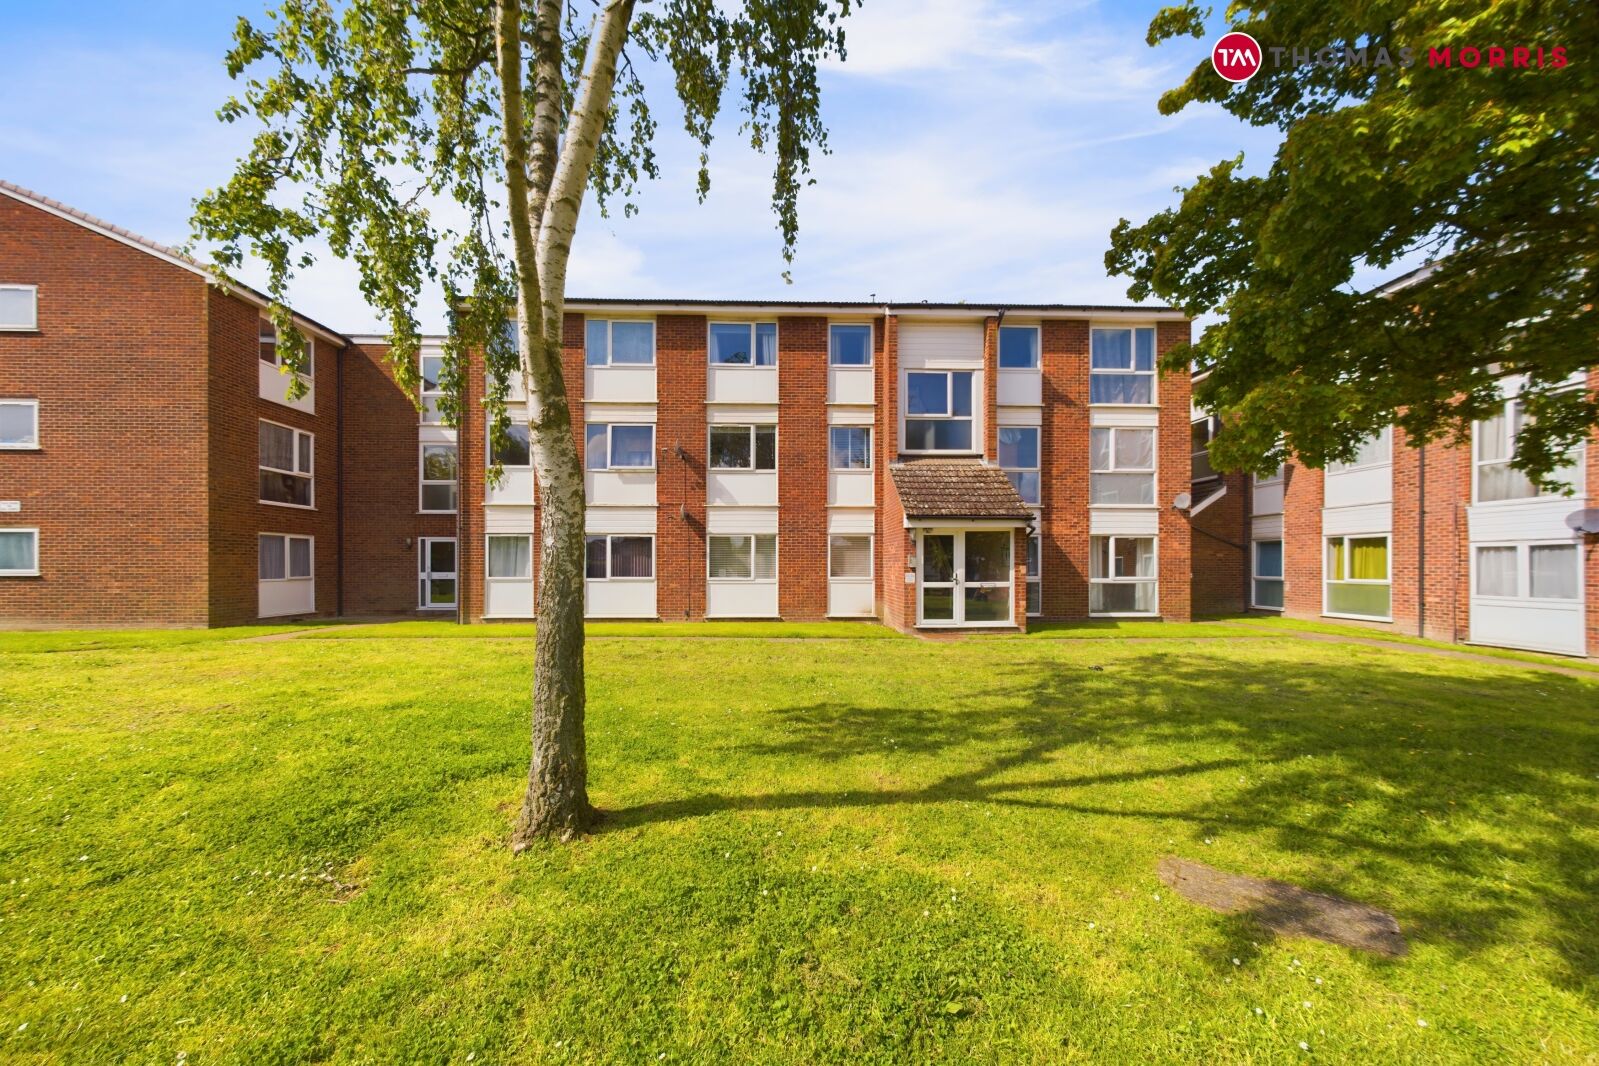 2 bedroom  flat for sale Swift Close, Royston, SG8, main image